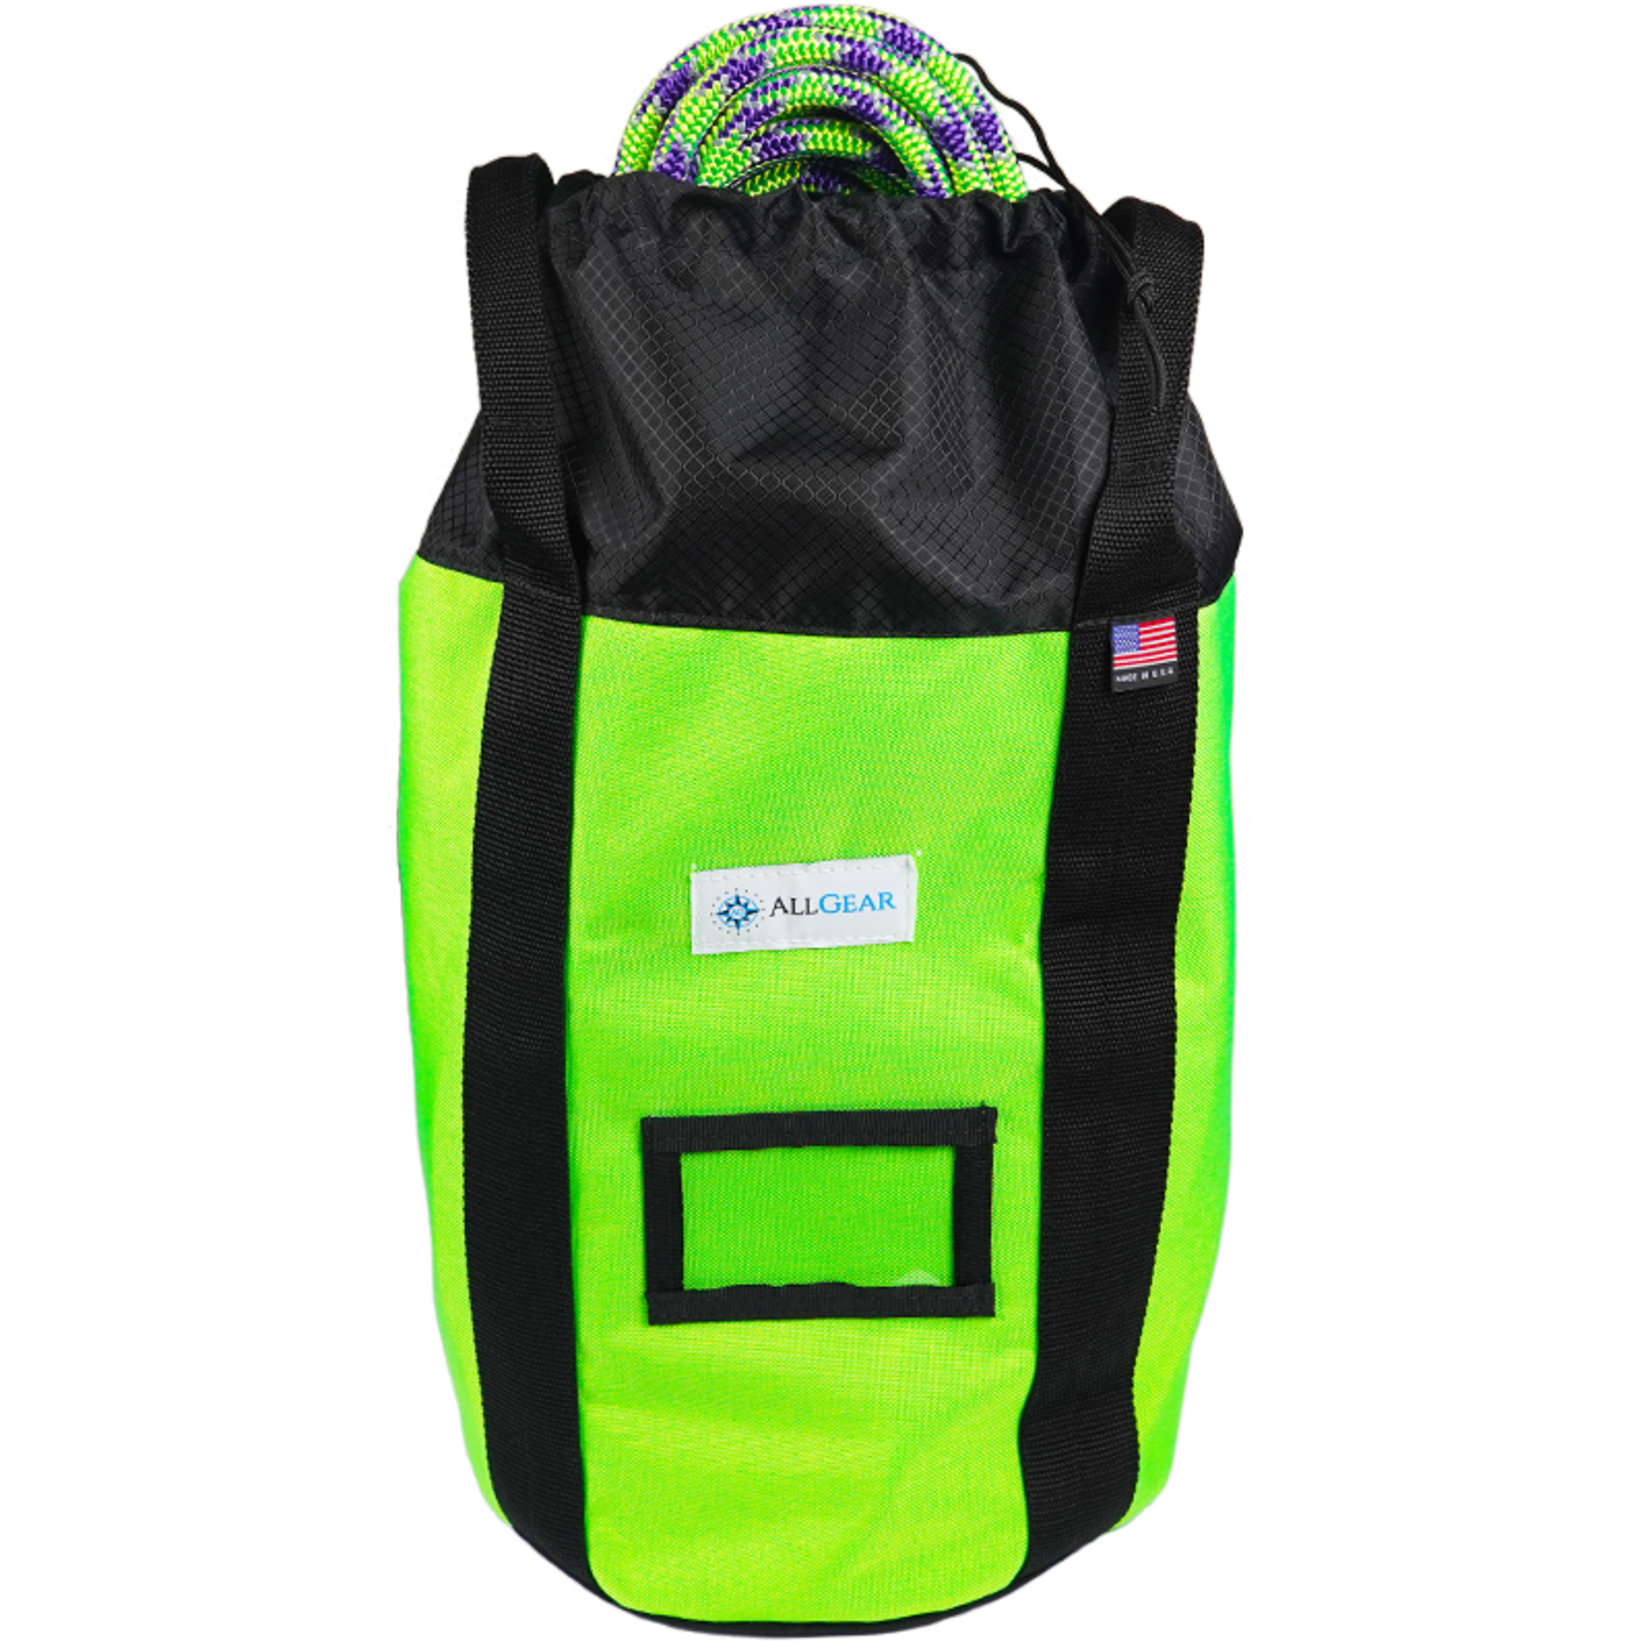 All Gear Inc. Simple Rope Bag - Neon Green